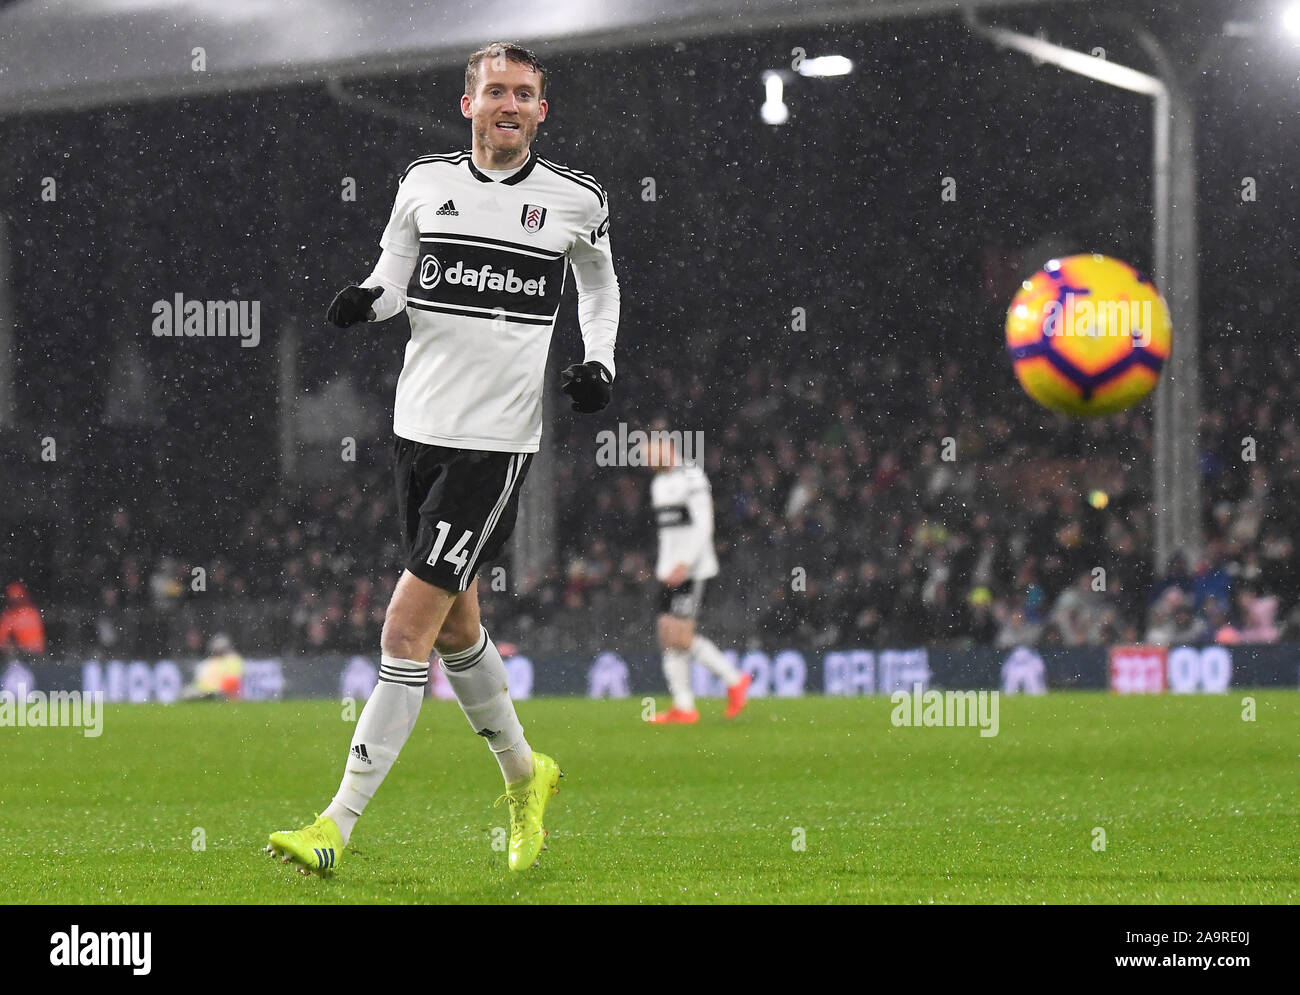 LONDON, ENGLAND - JANUARY 29, 2019: Andre Schurle of Fulham pictured during the 2018/19 Premier League game between Fulham FC and Brighton and Hove Albion at Craven Cottage. Stock Photo